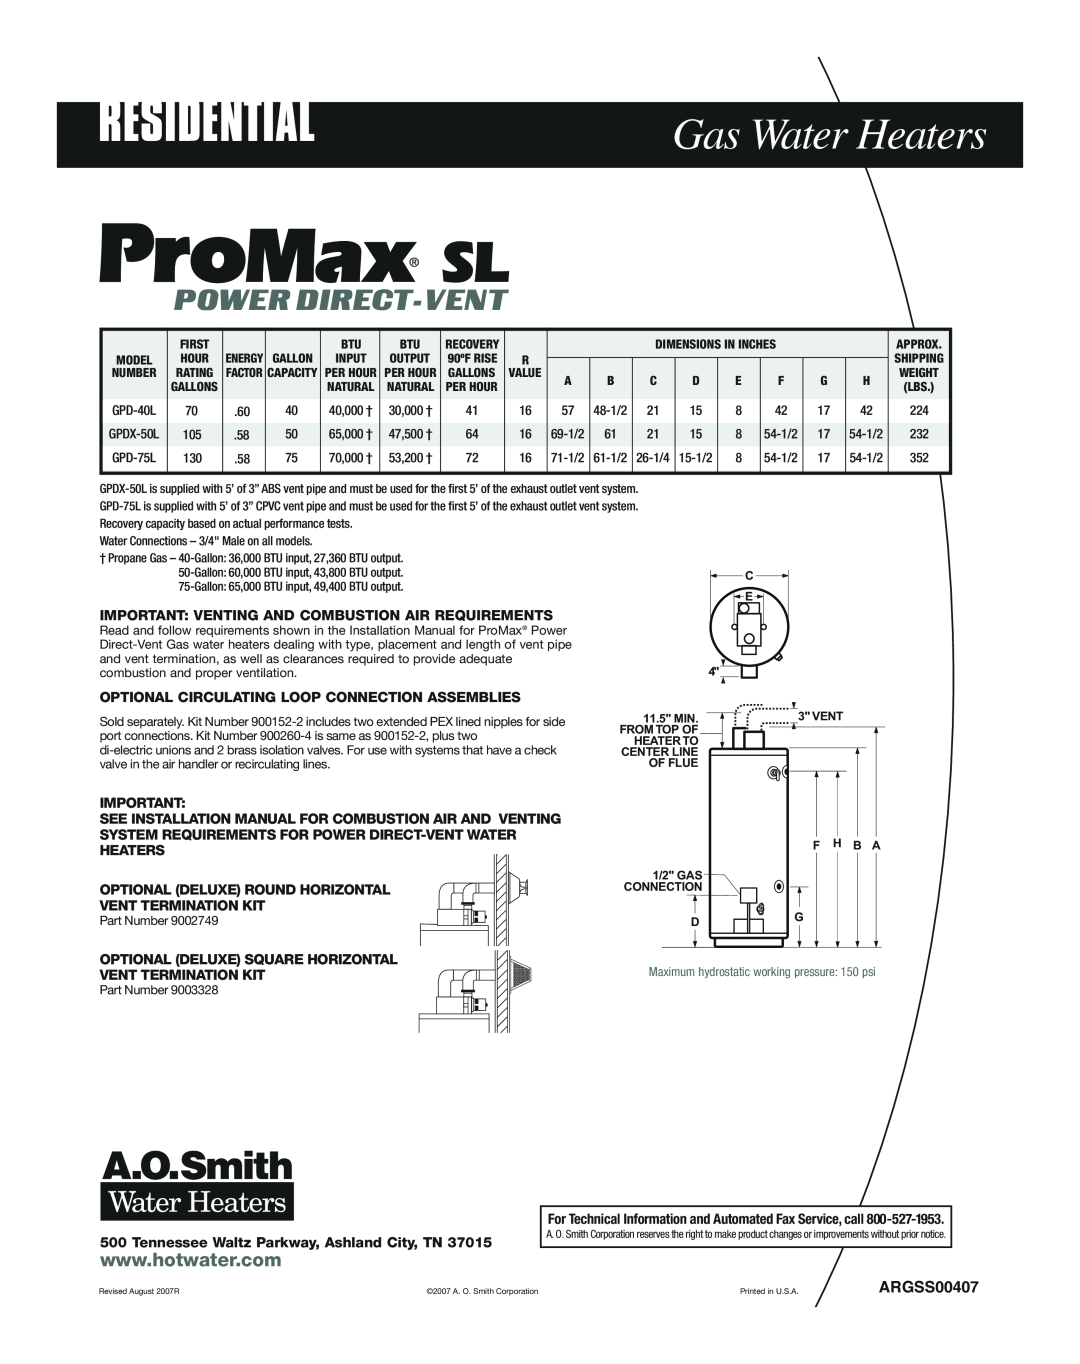 A.O. Smith SL Gas Water Heaters, Residential, Power Direct-Vent, ARGSS00407, Maximum hydrostatic working pressure 150 psi 